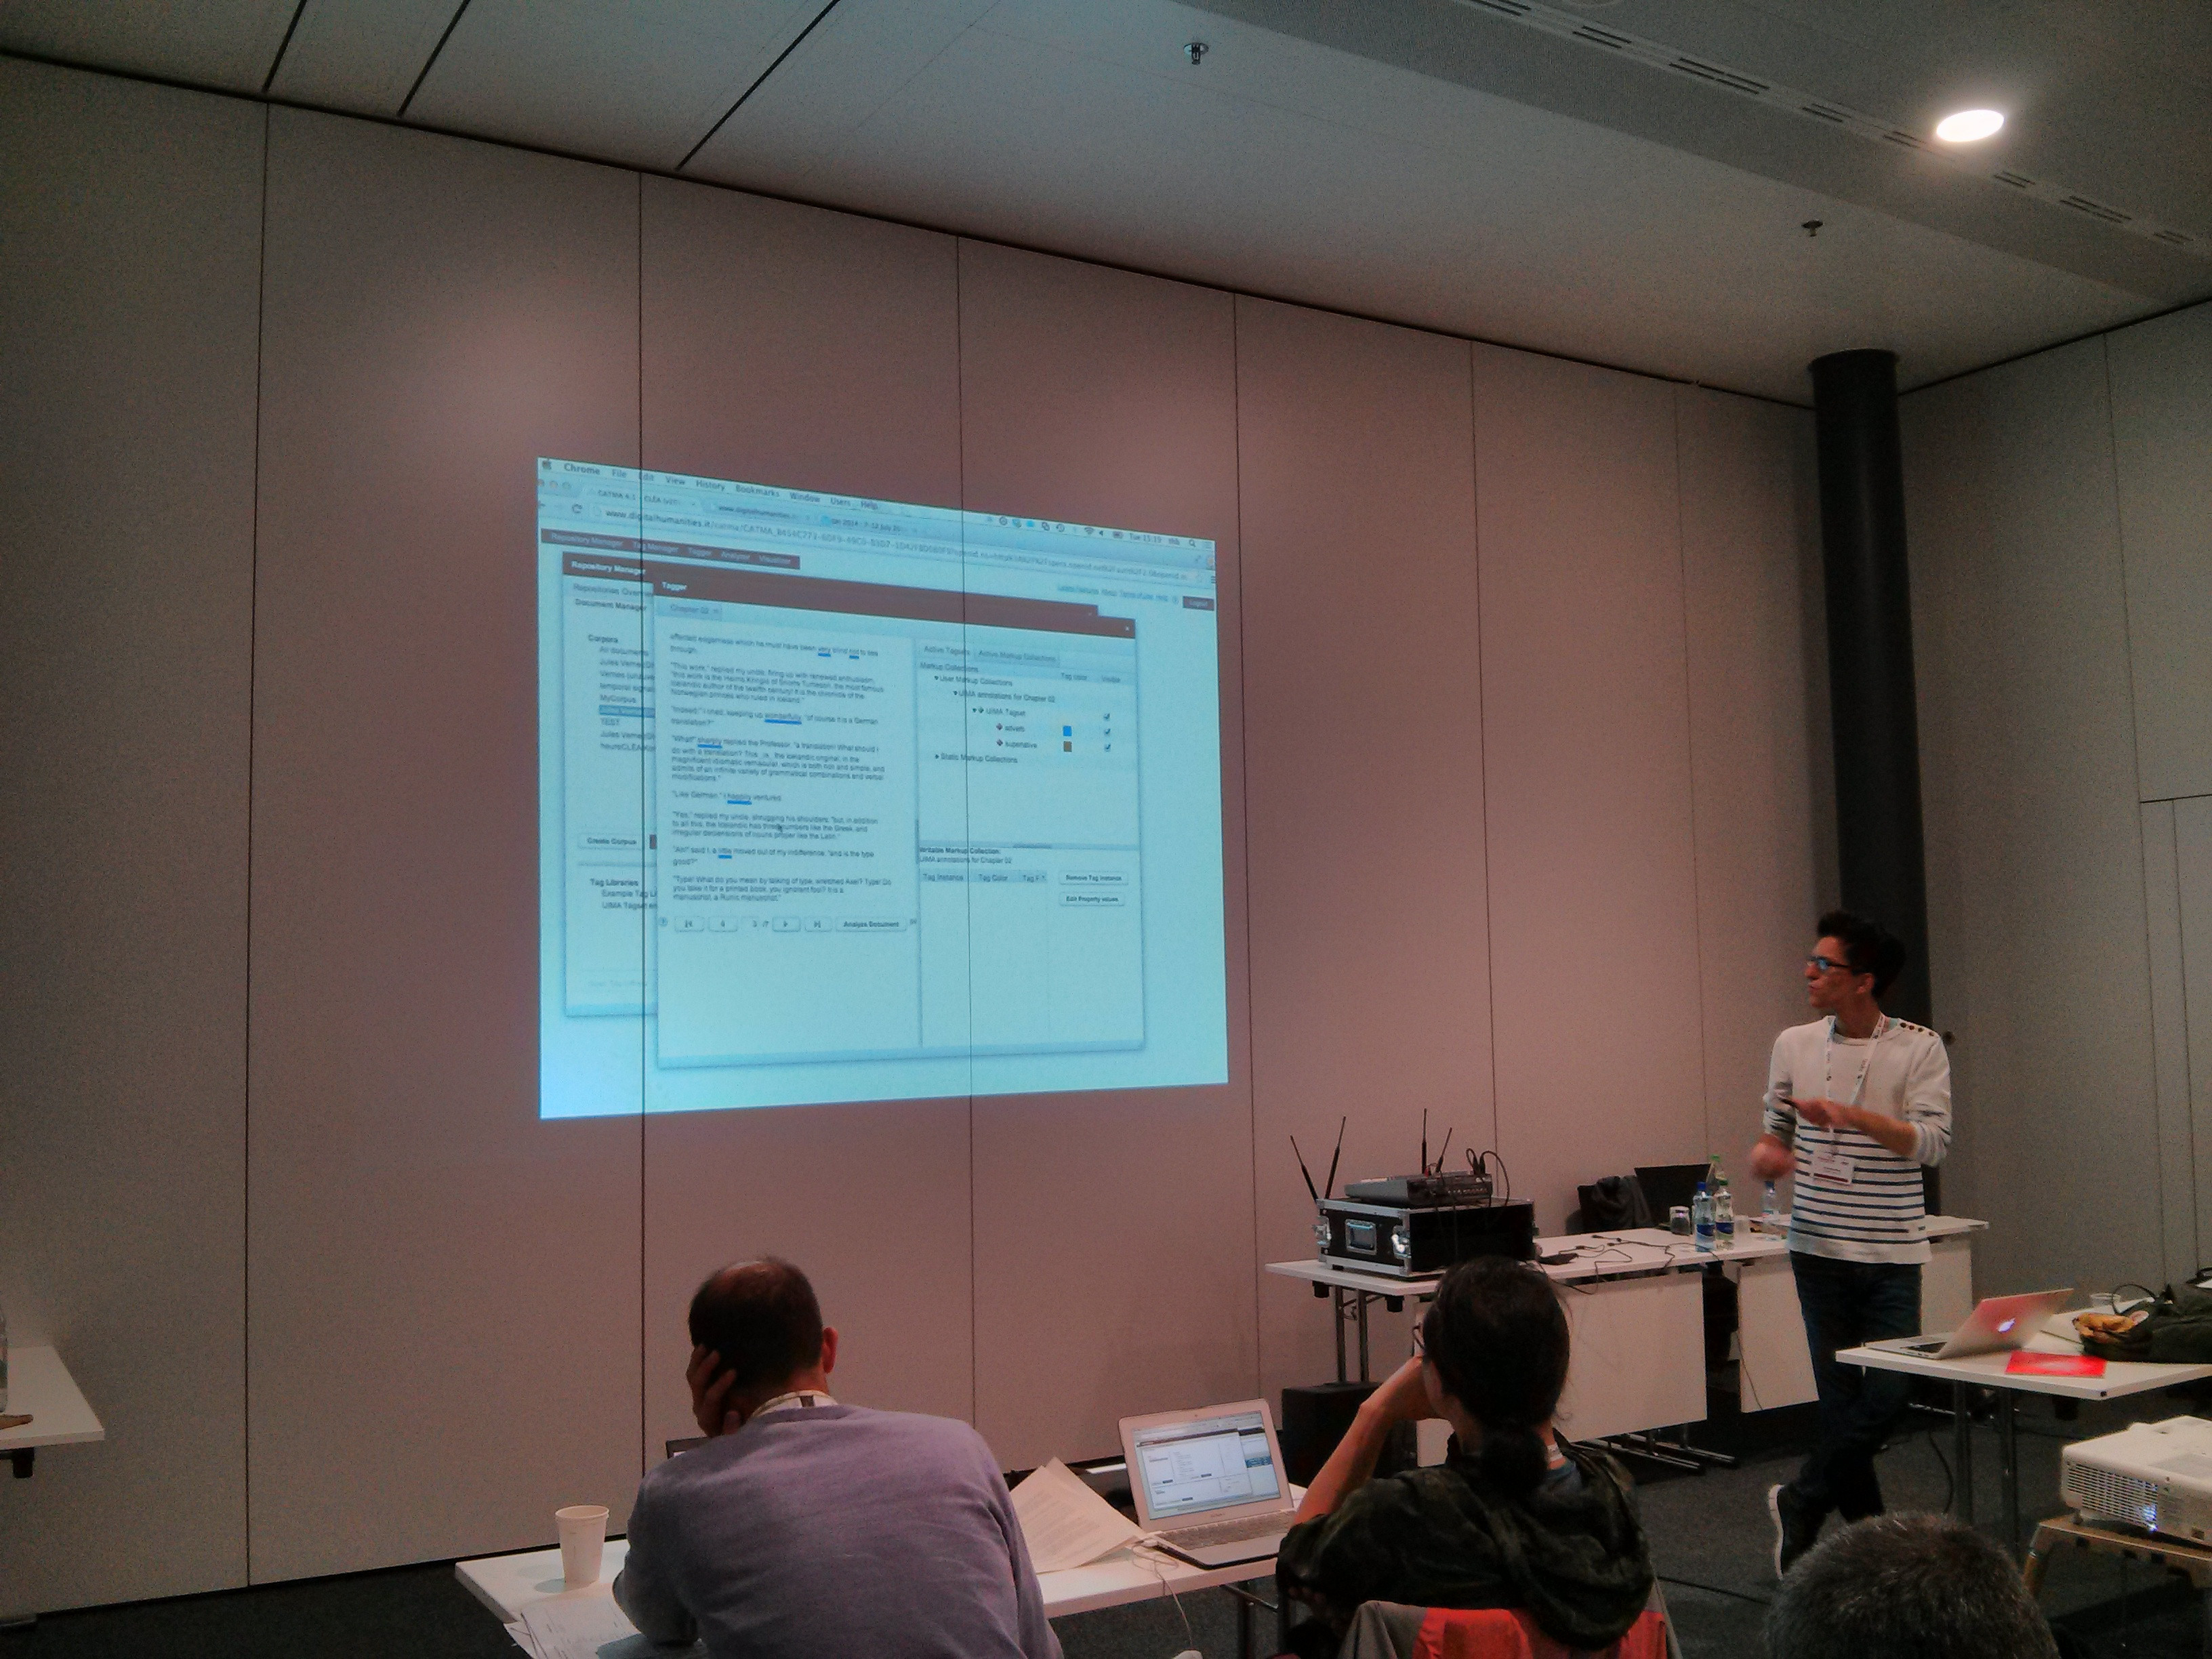 Thomas presenting automatically created annotations in CATMA at our #DH2014 tutorial in Lausanne.